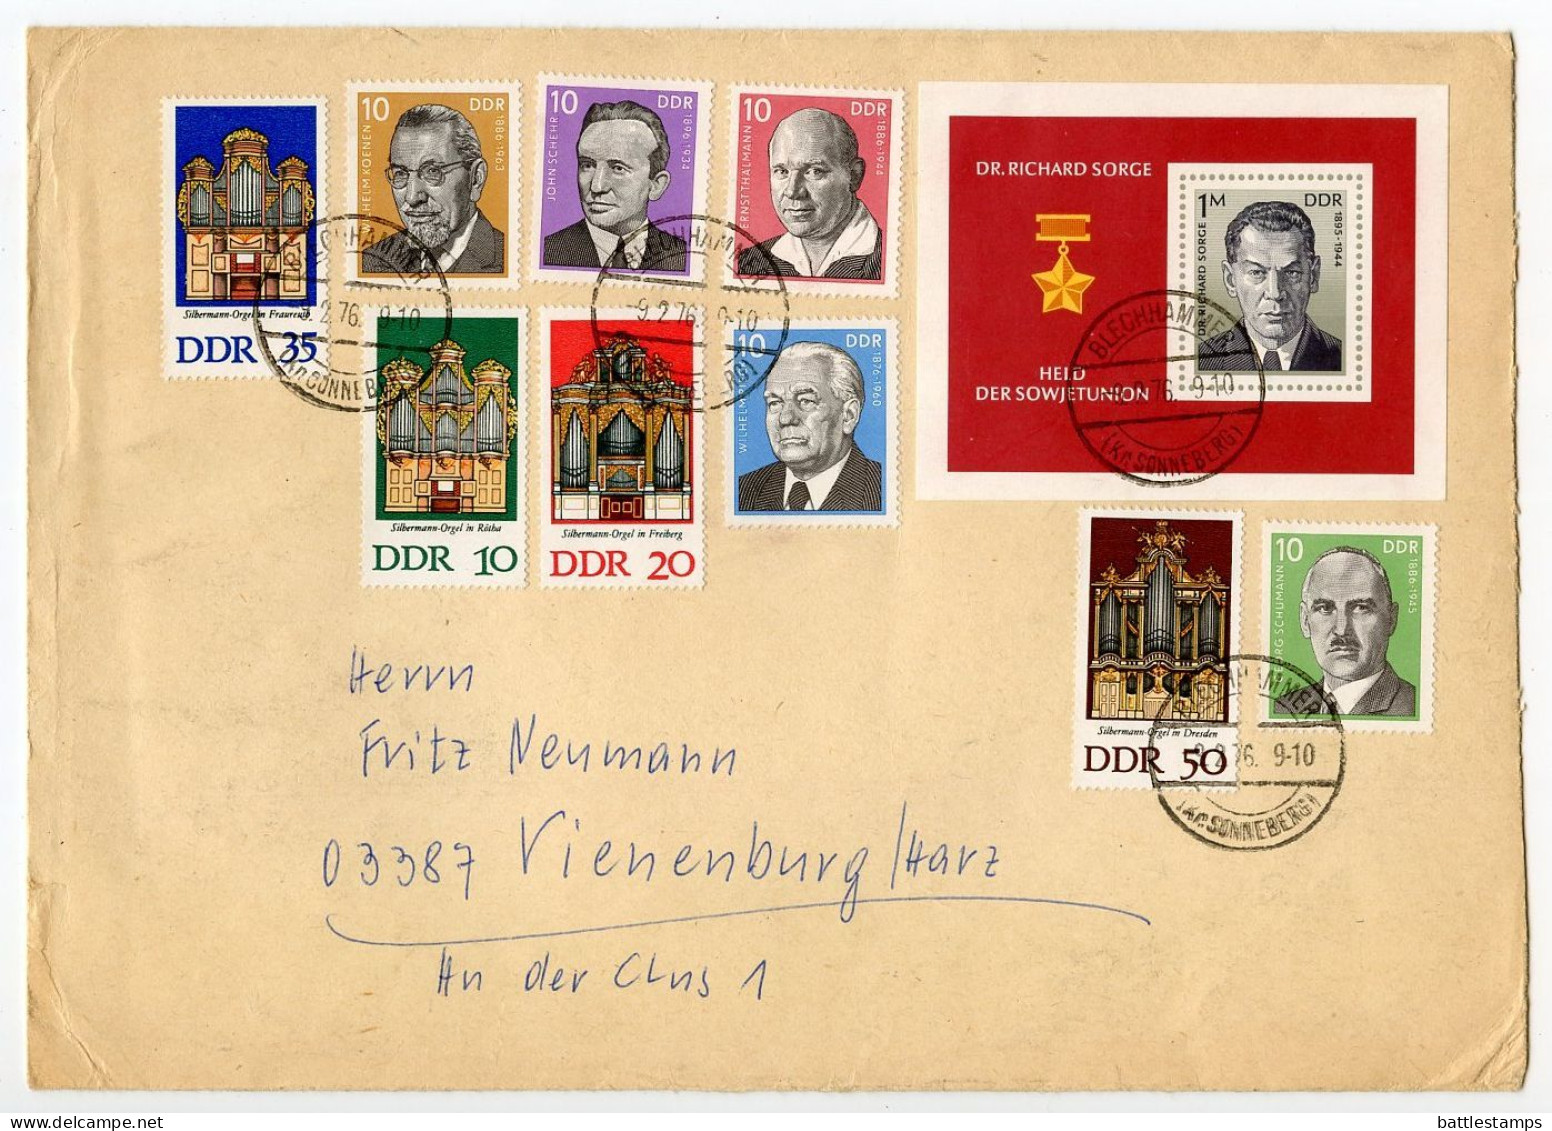 Germany East 1976 Cover; Blechhammer To Vienenburg; Stamps - Silberman Organs, Sorge S/S, President Pieck, Labor Leaders - Covers & Documents